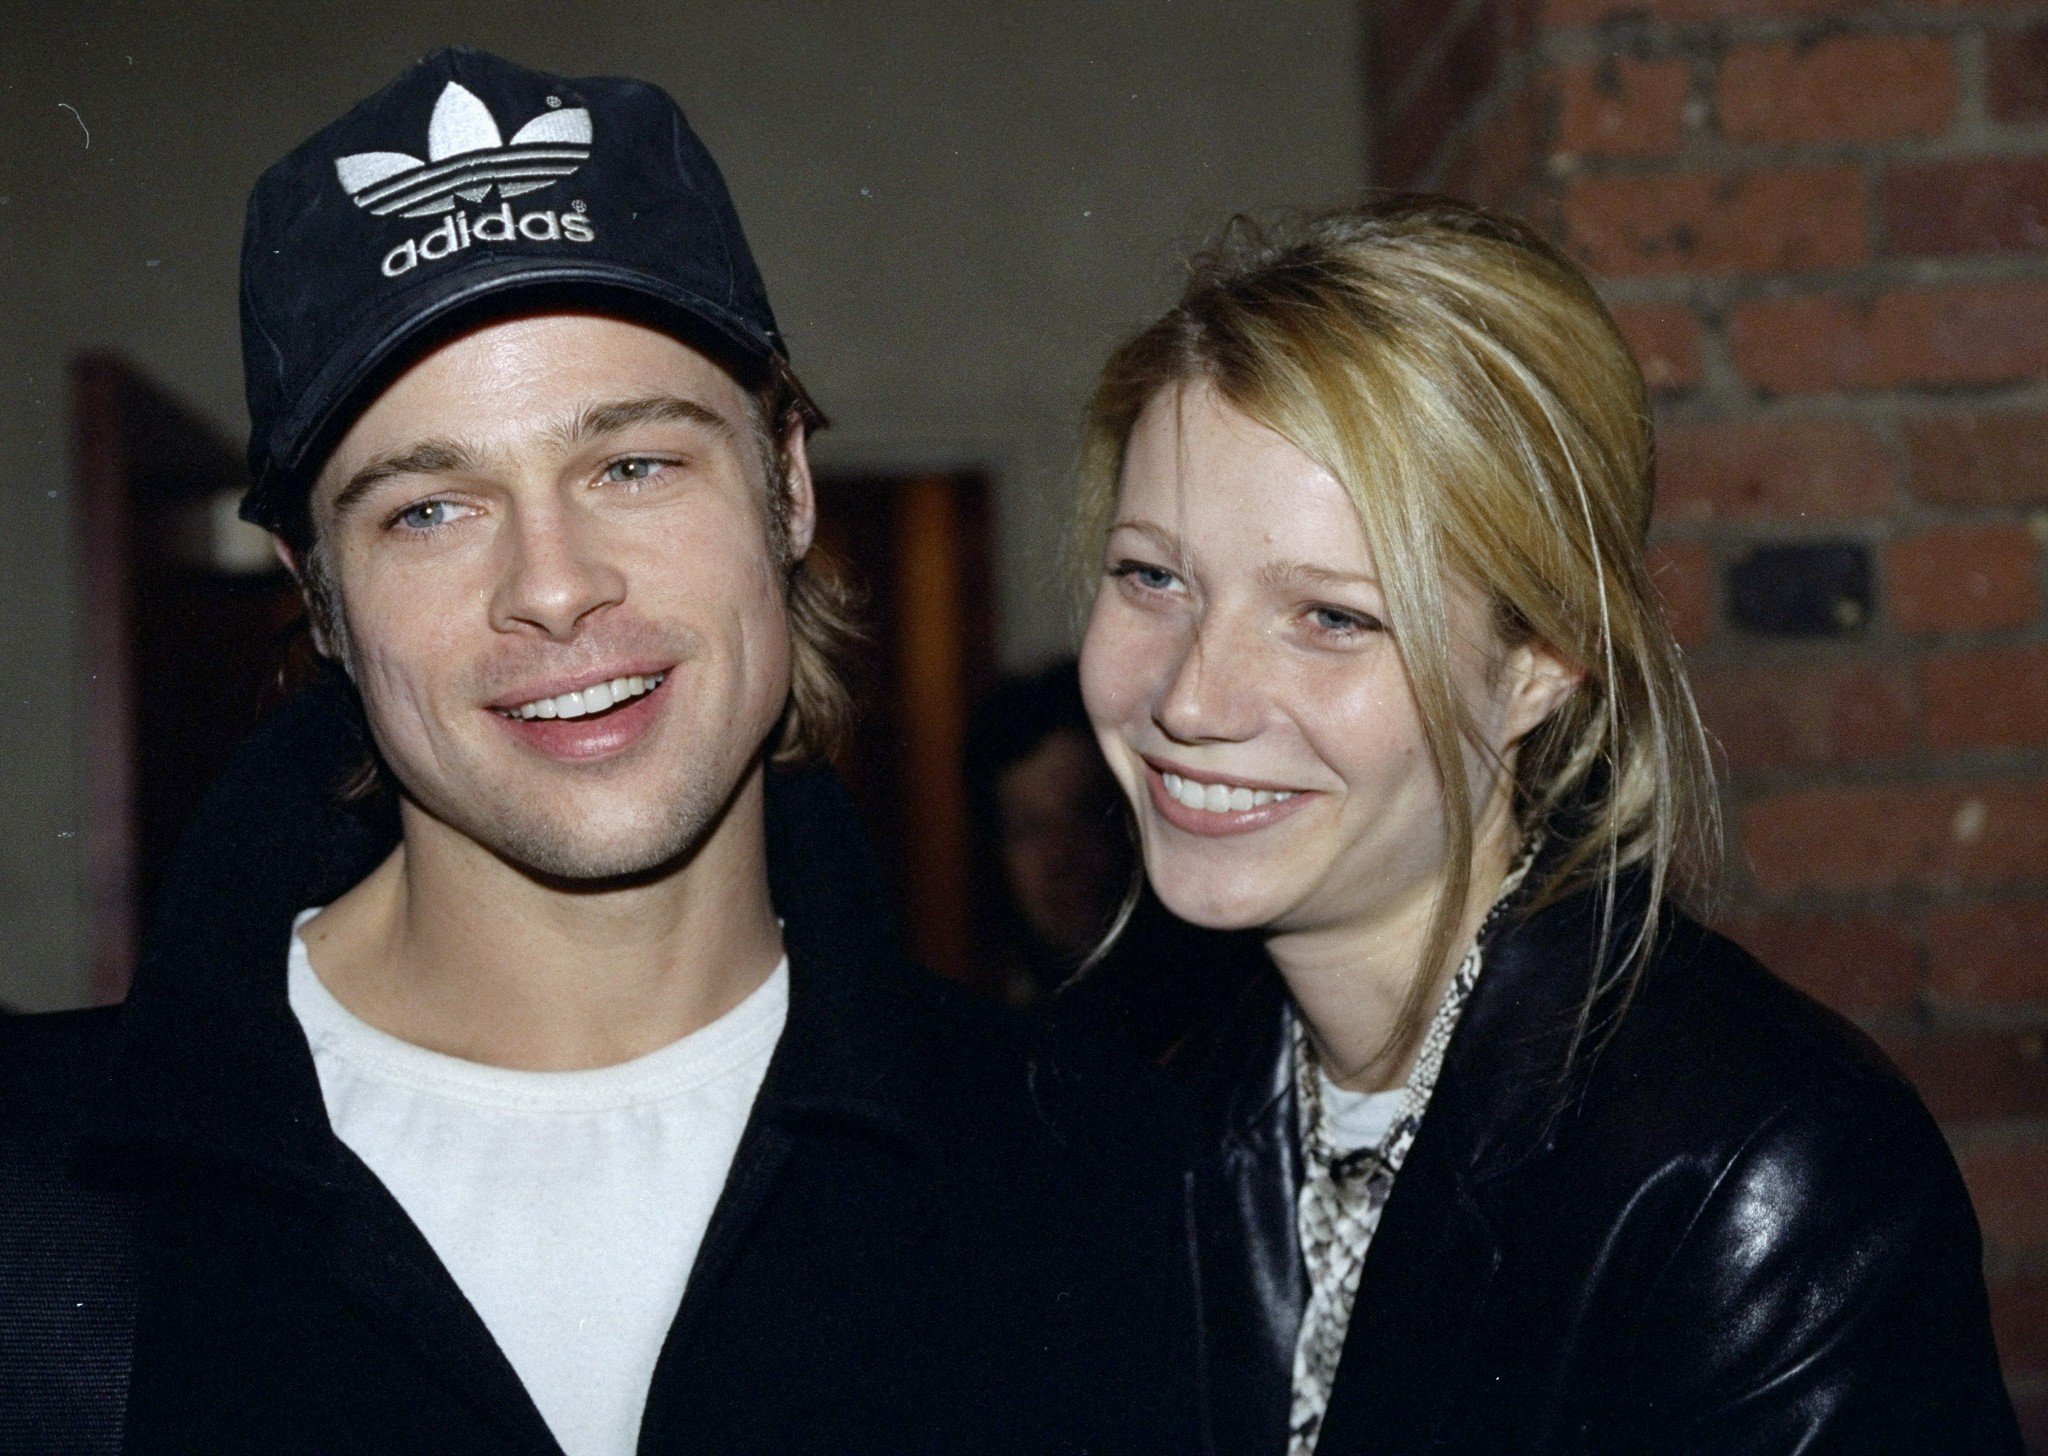 Brad Pitt and Gwyneth Paltrow at the Tribeca Film Center for the screening of "Fargo" on March 6, 1996 | Source: Getty Images